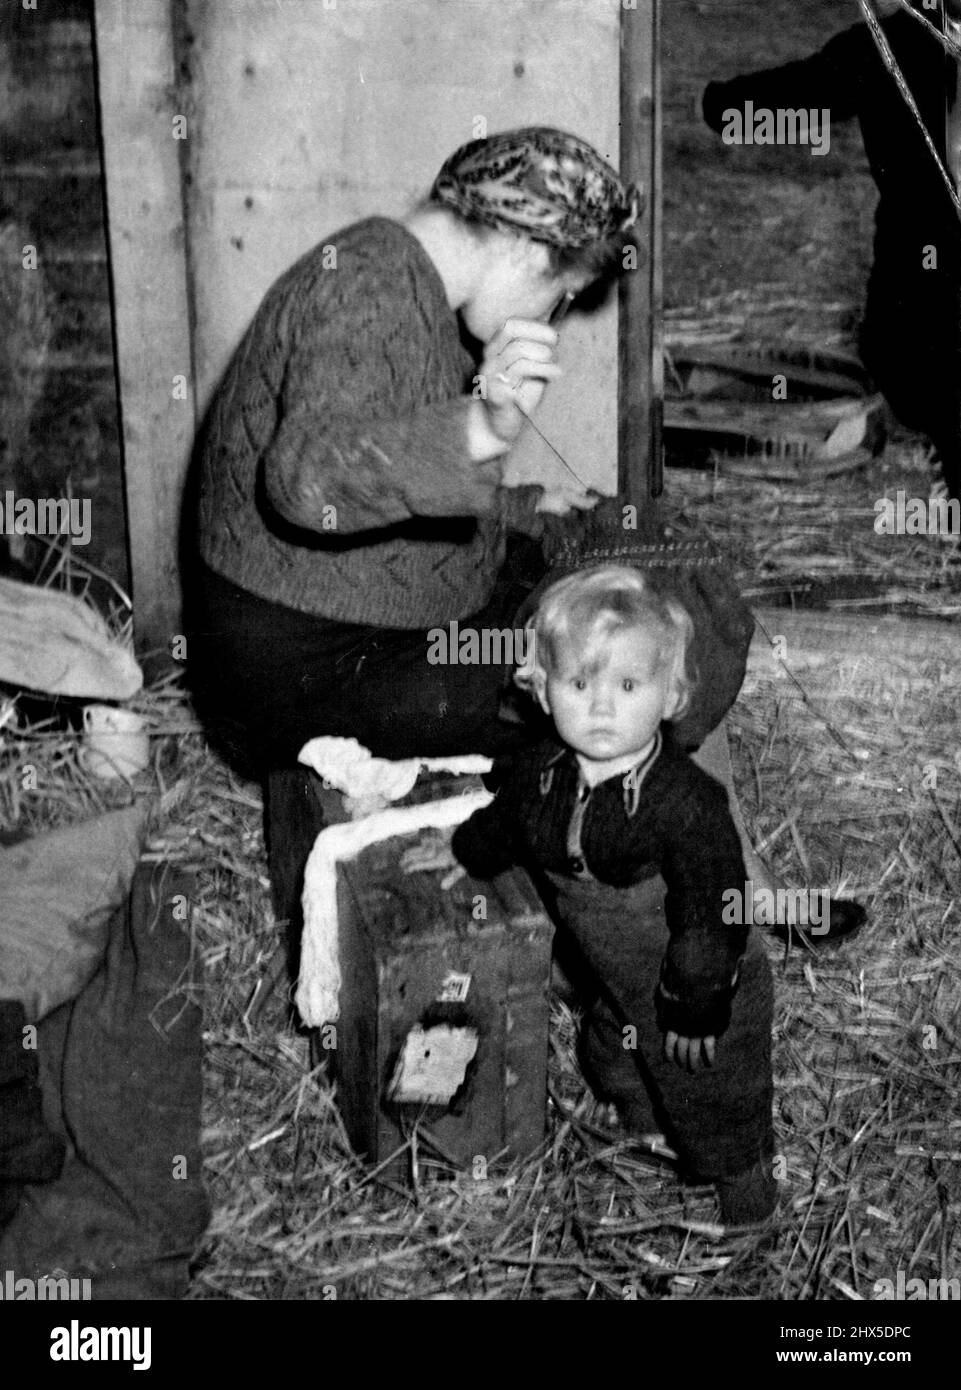 The Menace of Starving Europe Stables Make Transit Camp For Displaced Germans Travelling West In British Zone -- A German woman sits by the doorway doing her mending, while her child stumbles about in the straw of their stable in Velzen camp, 25 miles from Luneberg, in British occupied Germany. This will be their home until they can join a trainload of other refugees going to one of the better-fed country districts. German families from the border zone between British and Russian occupied territory, who have been evacuated to take way for Germans expelled from Poland and the eastern territorie Stock Photo